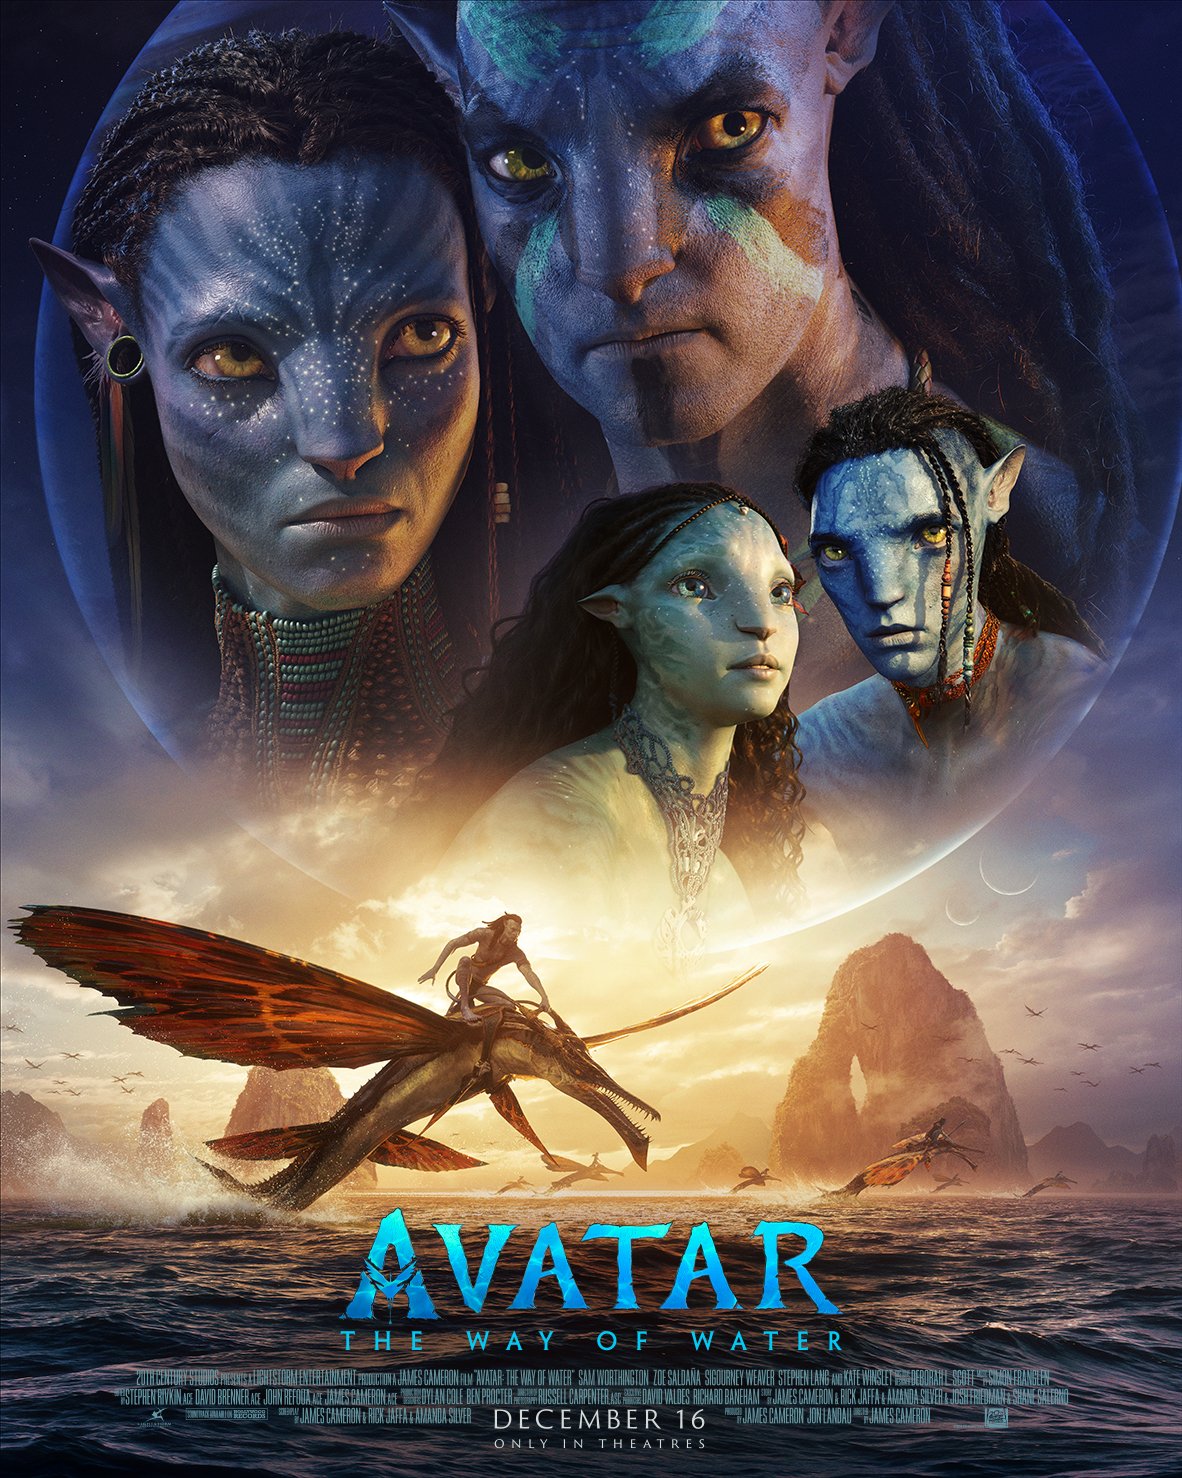 The official poster of 'Avatar: The Way of Water,' releasing on December 16, 2022